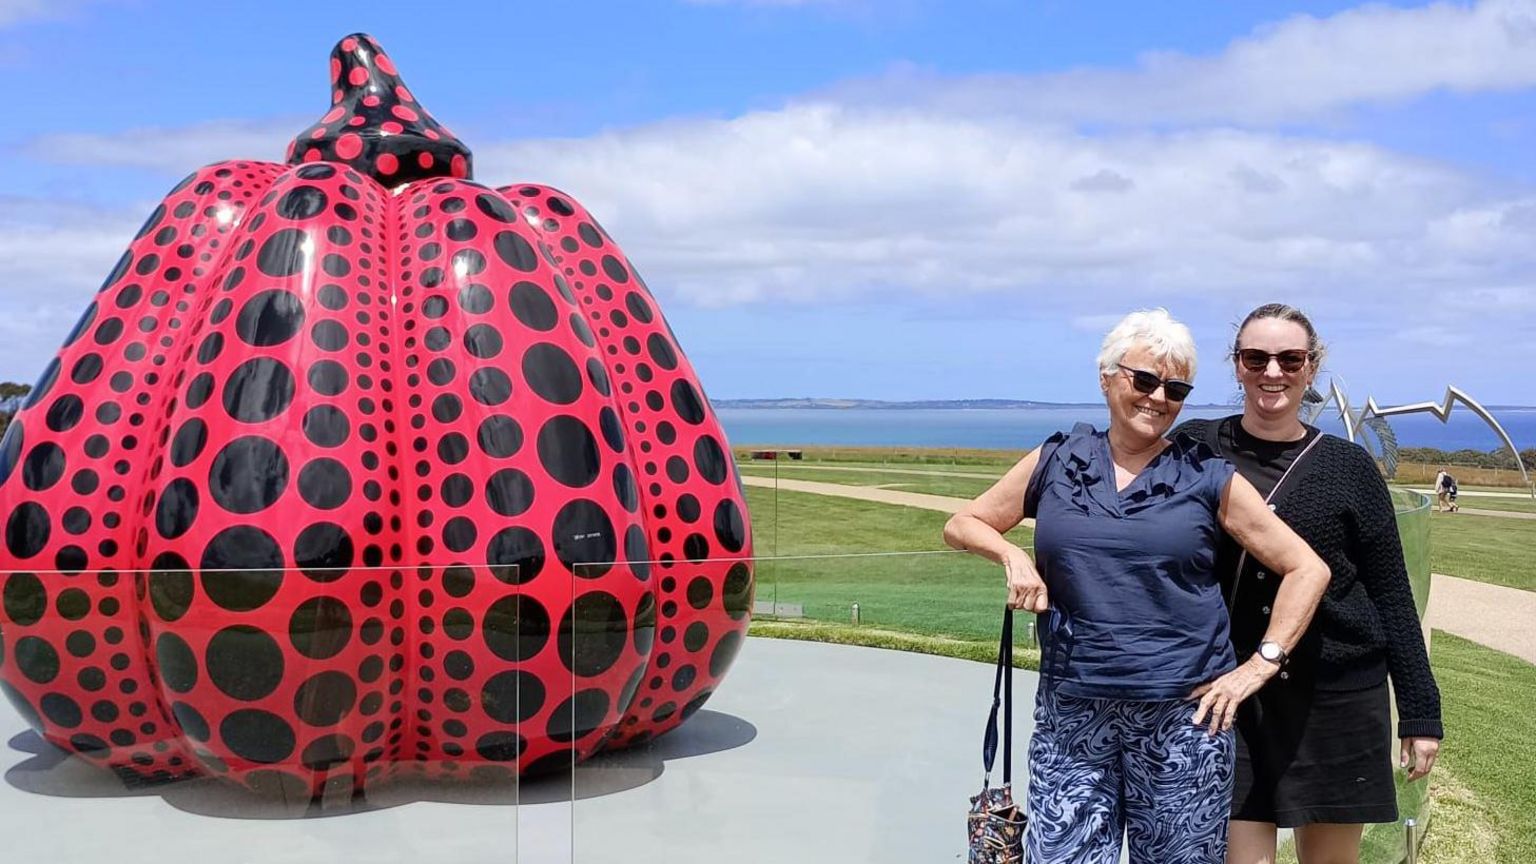 Mu Goode with her daughter Abby in front of a red sculpture in Australia 